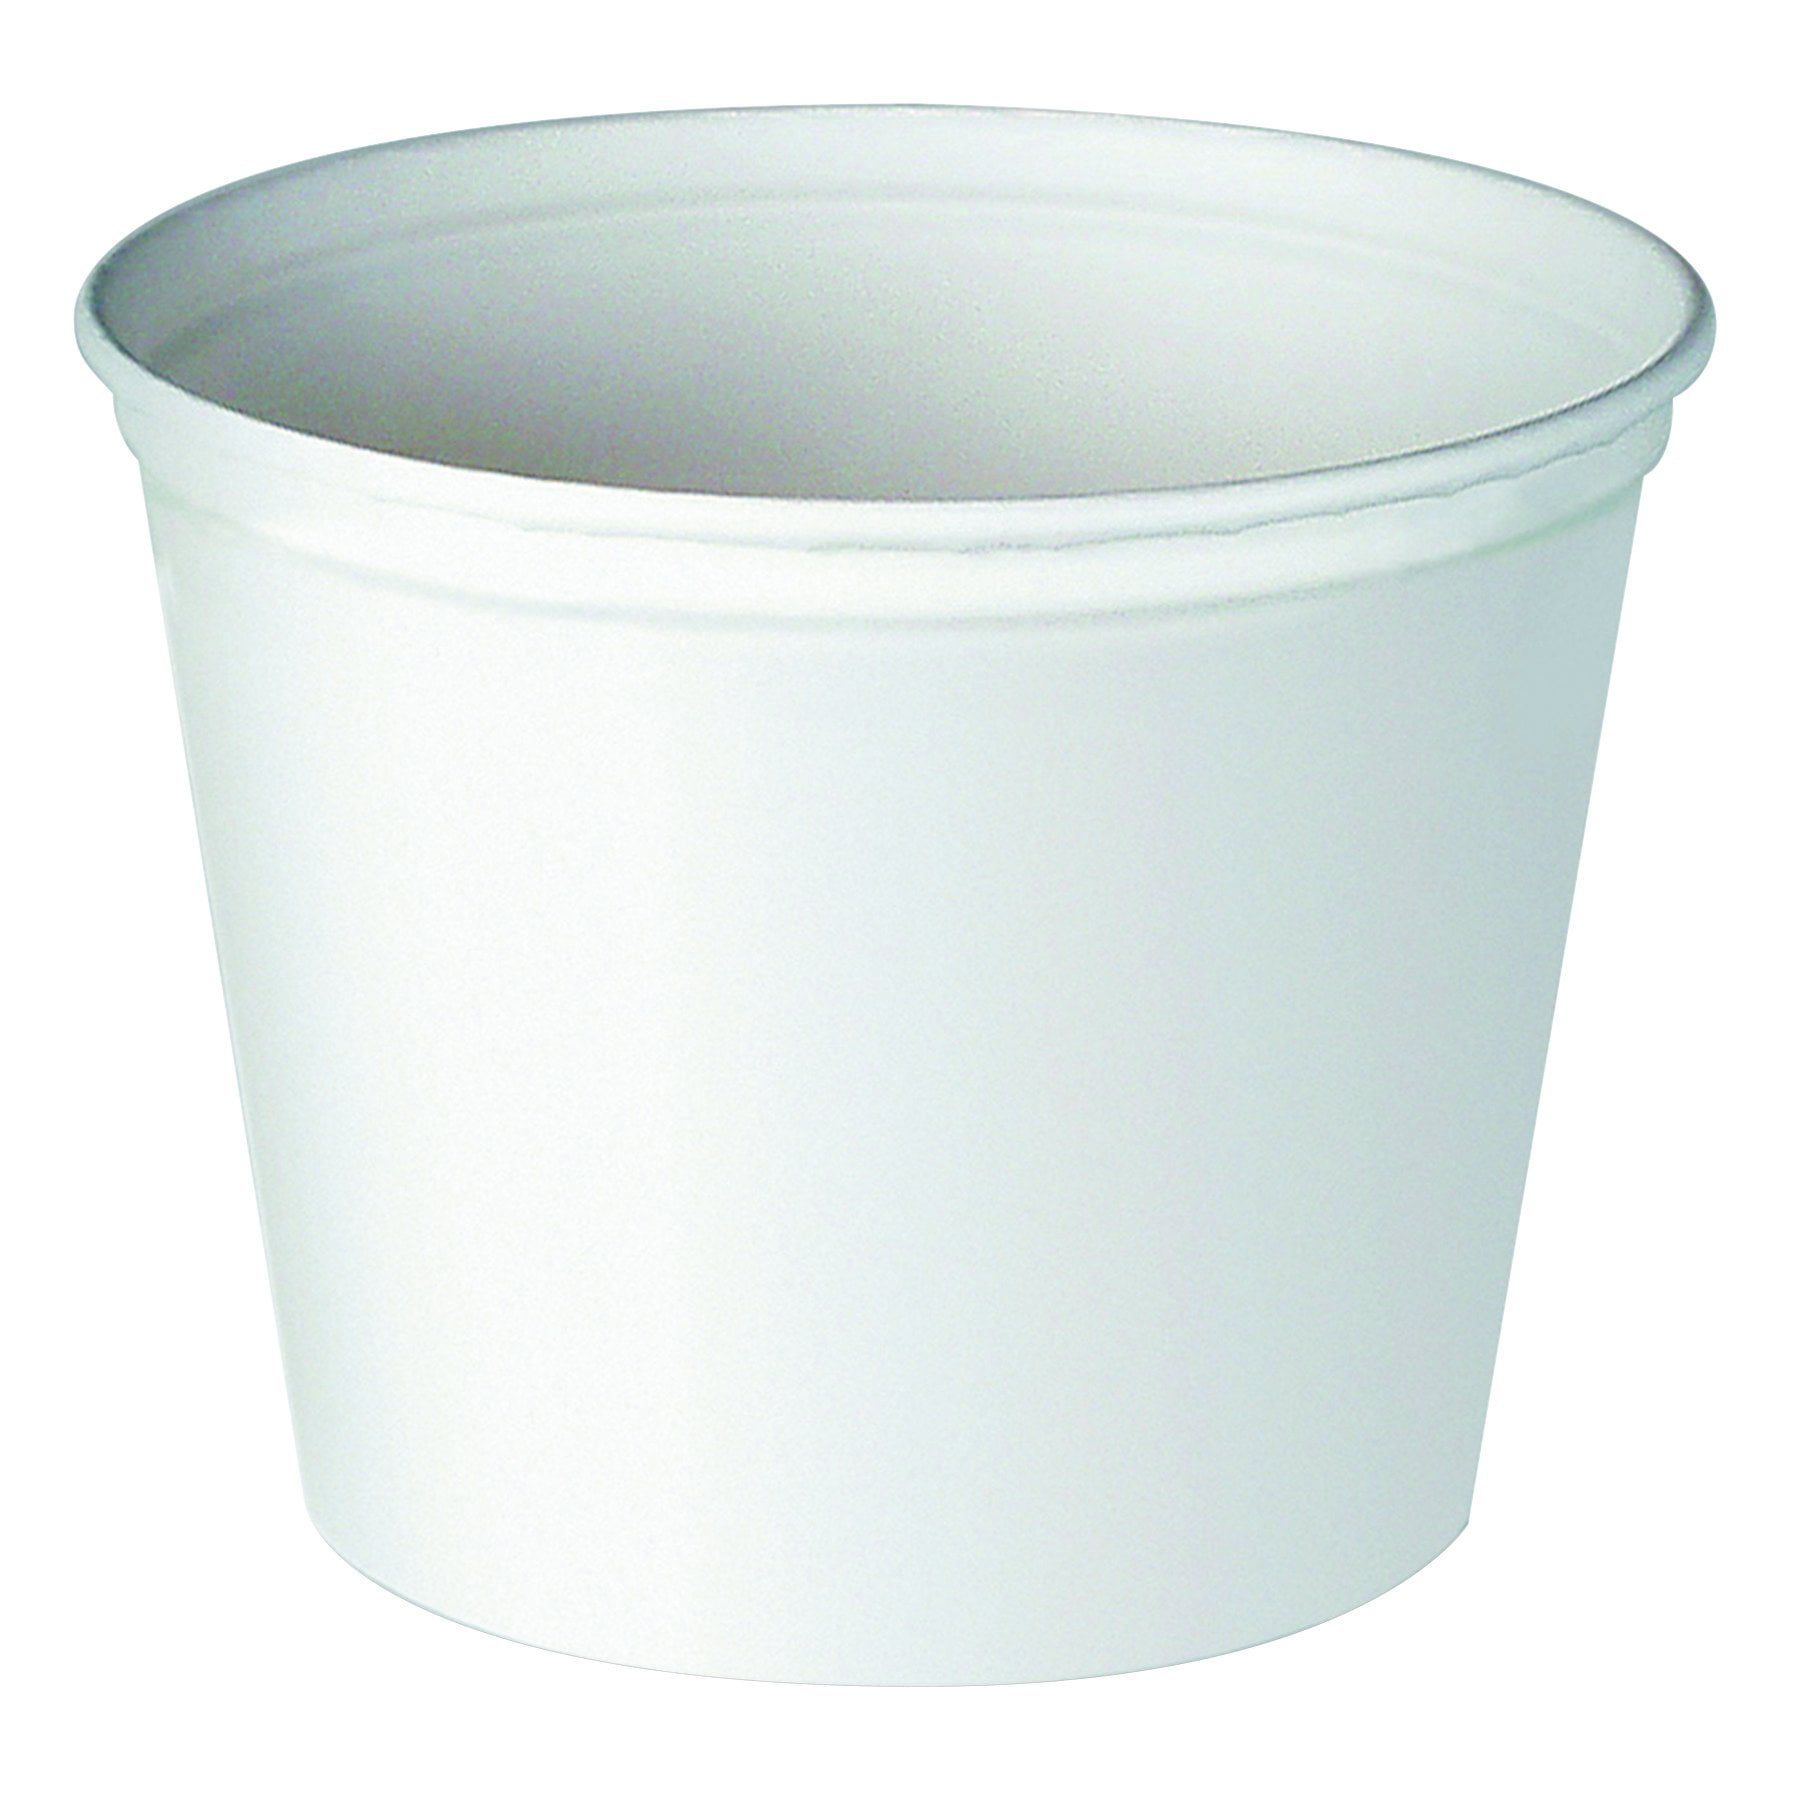 Solo Cup Company White Paper Water Cups 3 Oz 50 Bags of 100/carton for sale online 